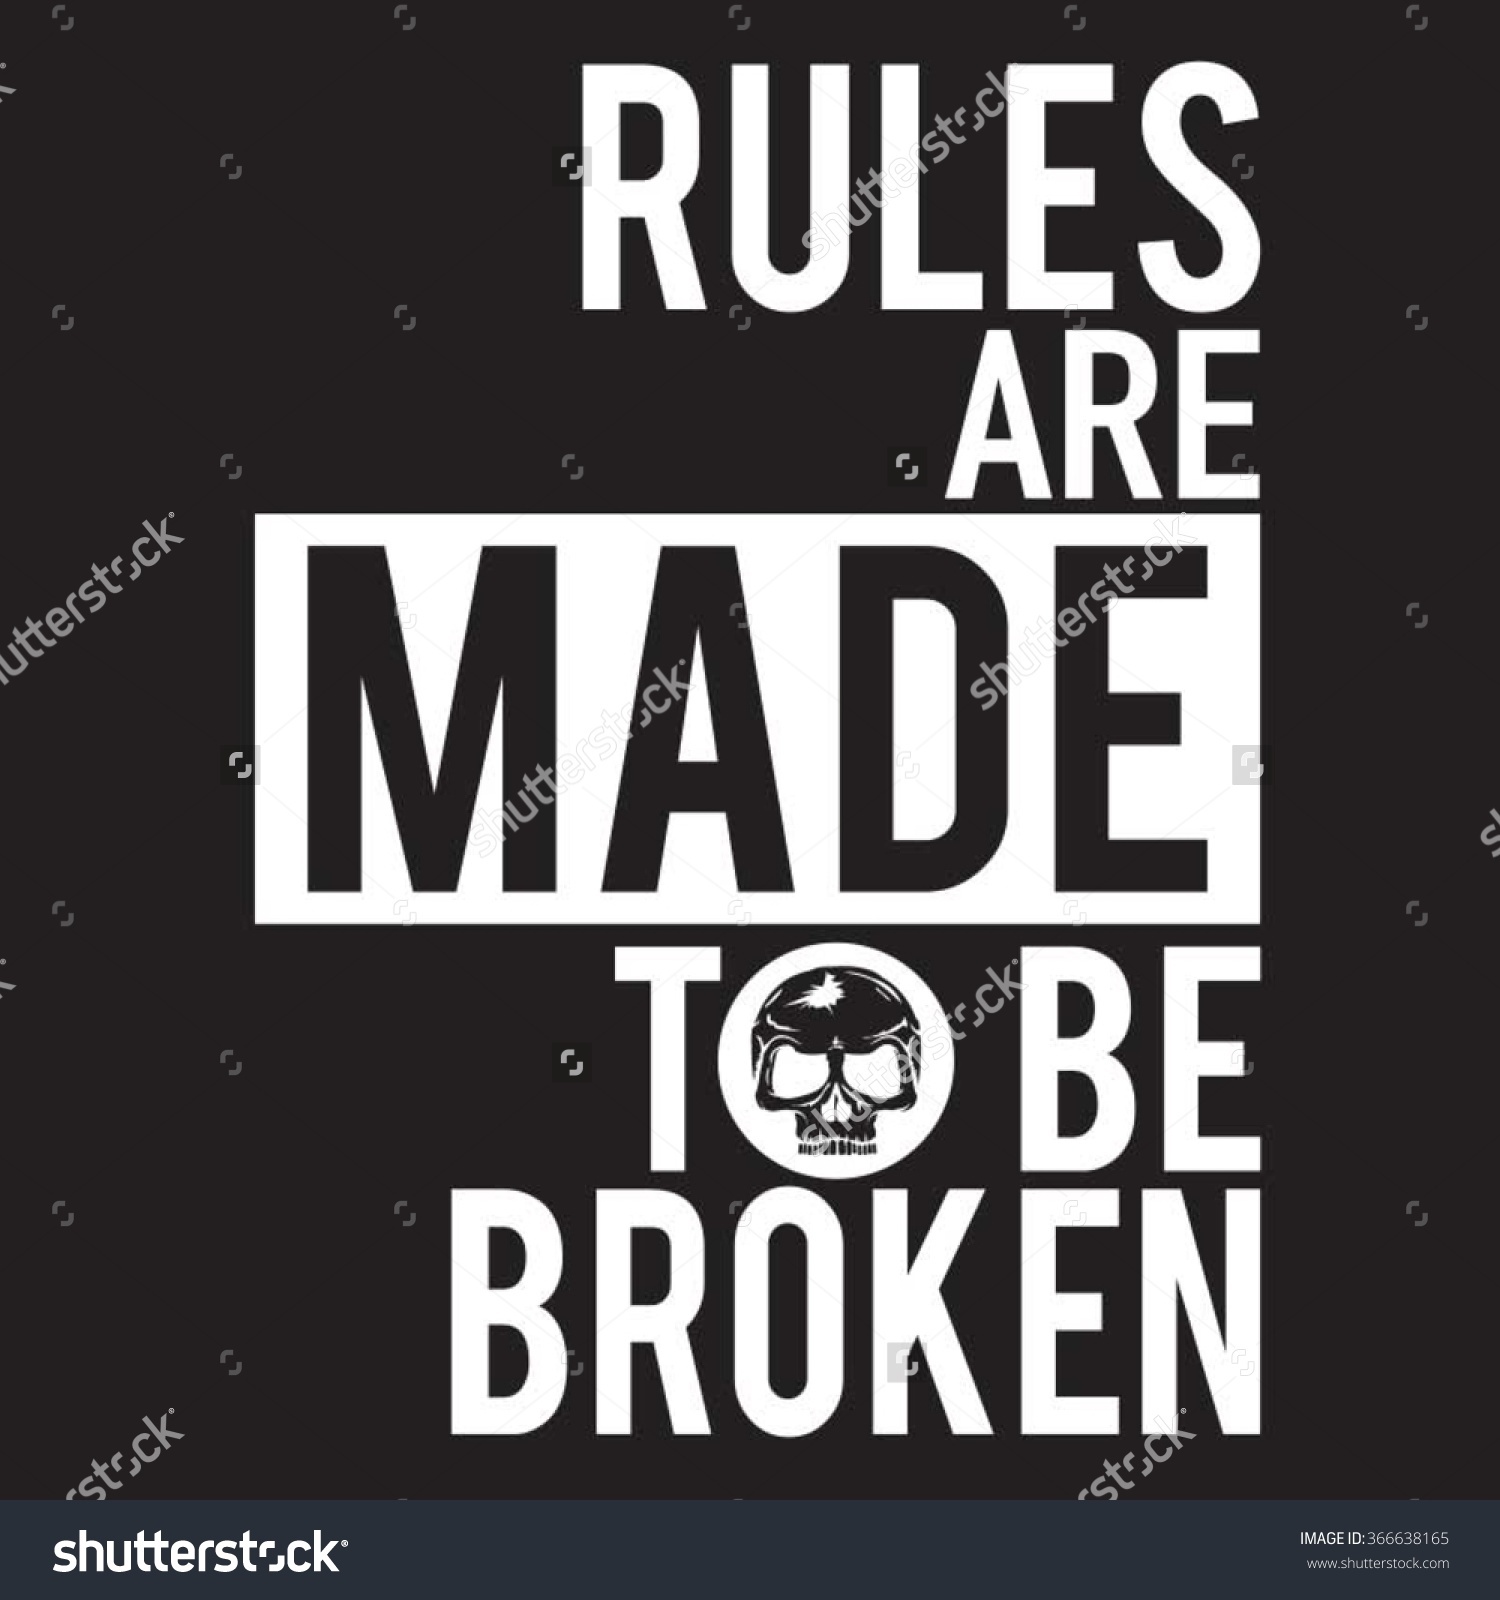 Rules are made to be broken. Кофта Break the Rules. Rules are made футболка. Breaking the Rules logo. Message rules